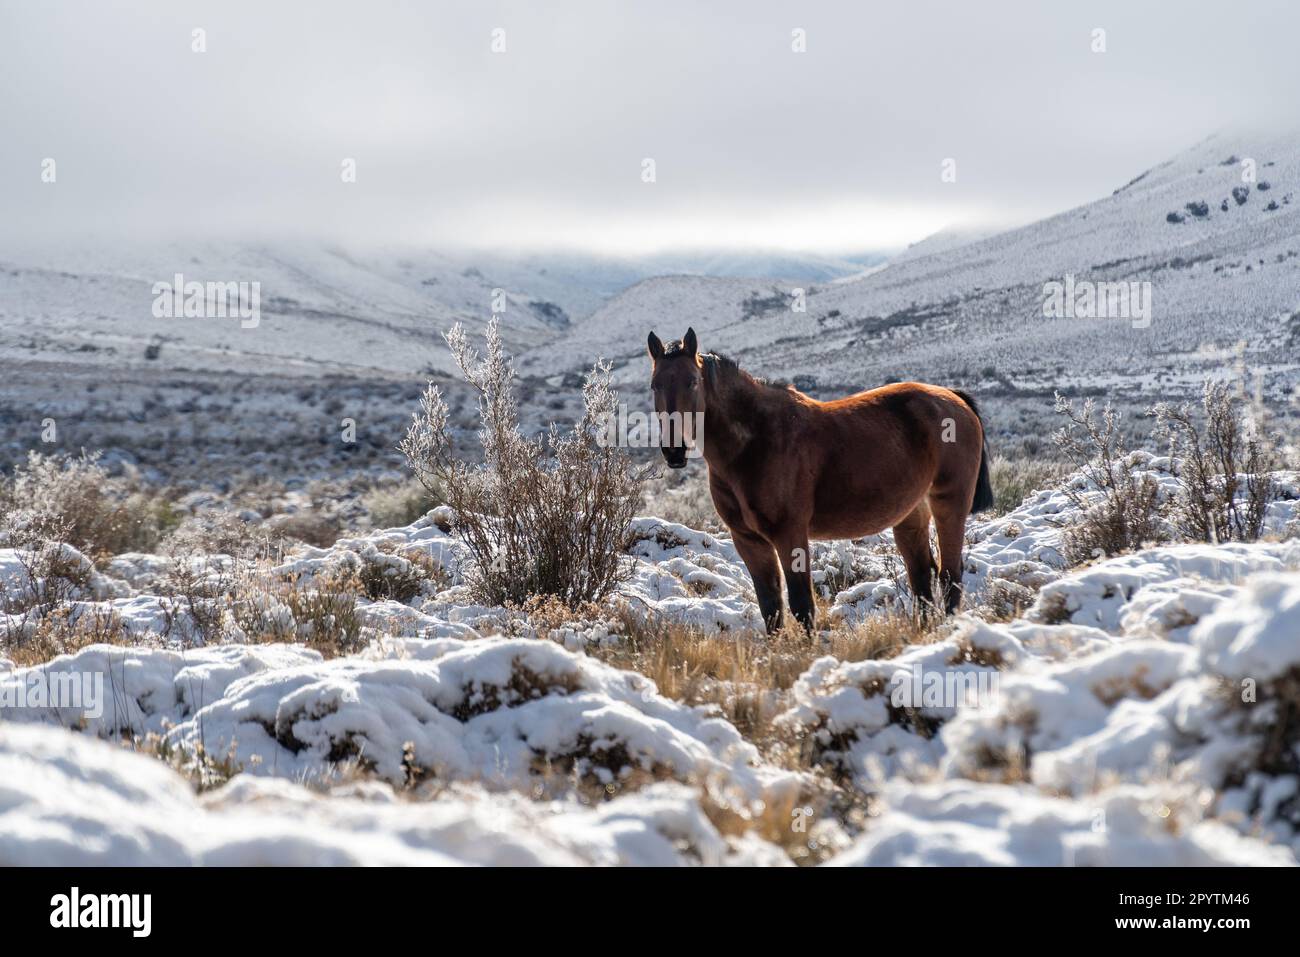 A brown equine animal standing in a snowy landscape by the side of a hill Stock Photo